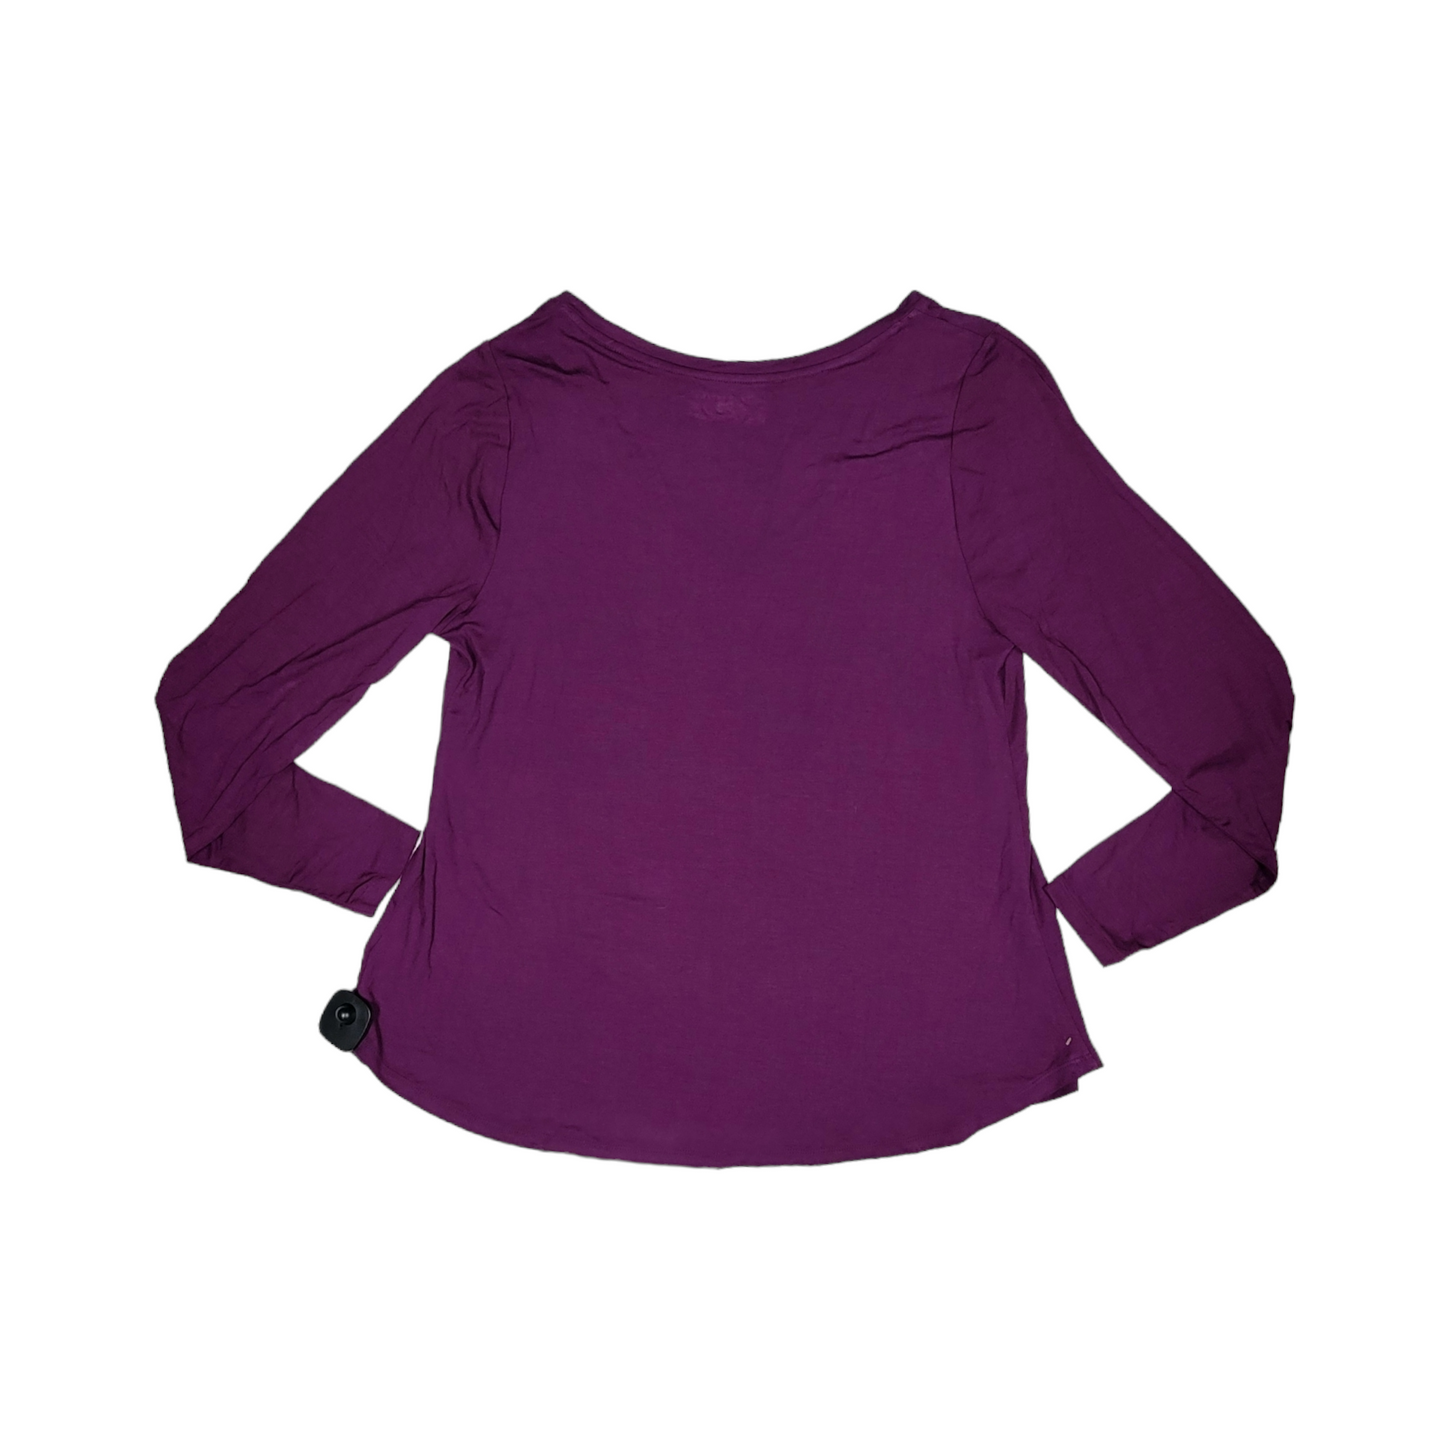 Top Long Sleeve By Lane Bryant  Size: 14